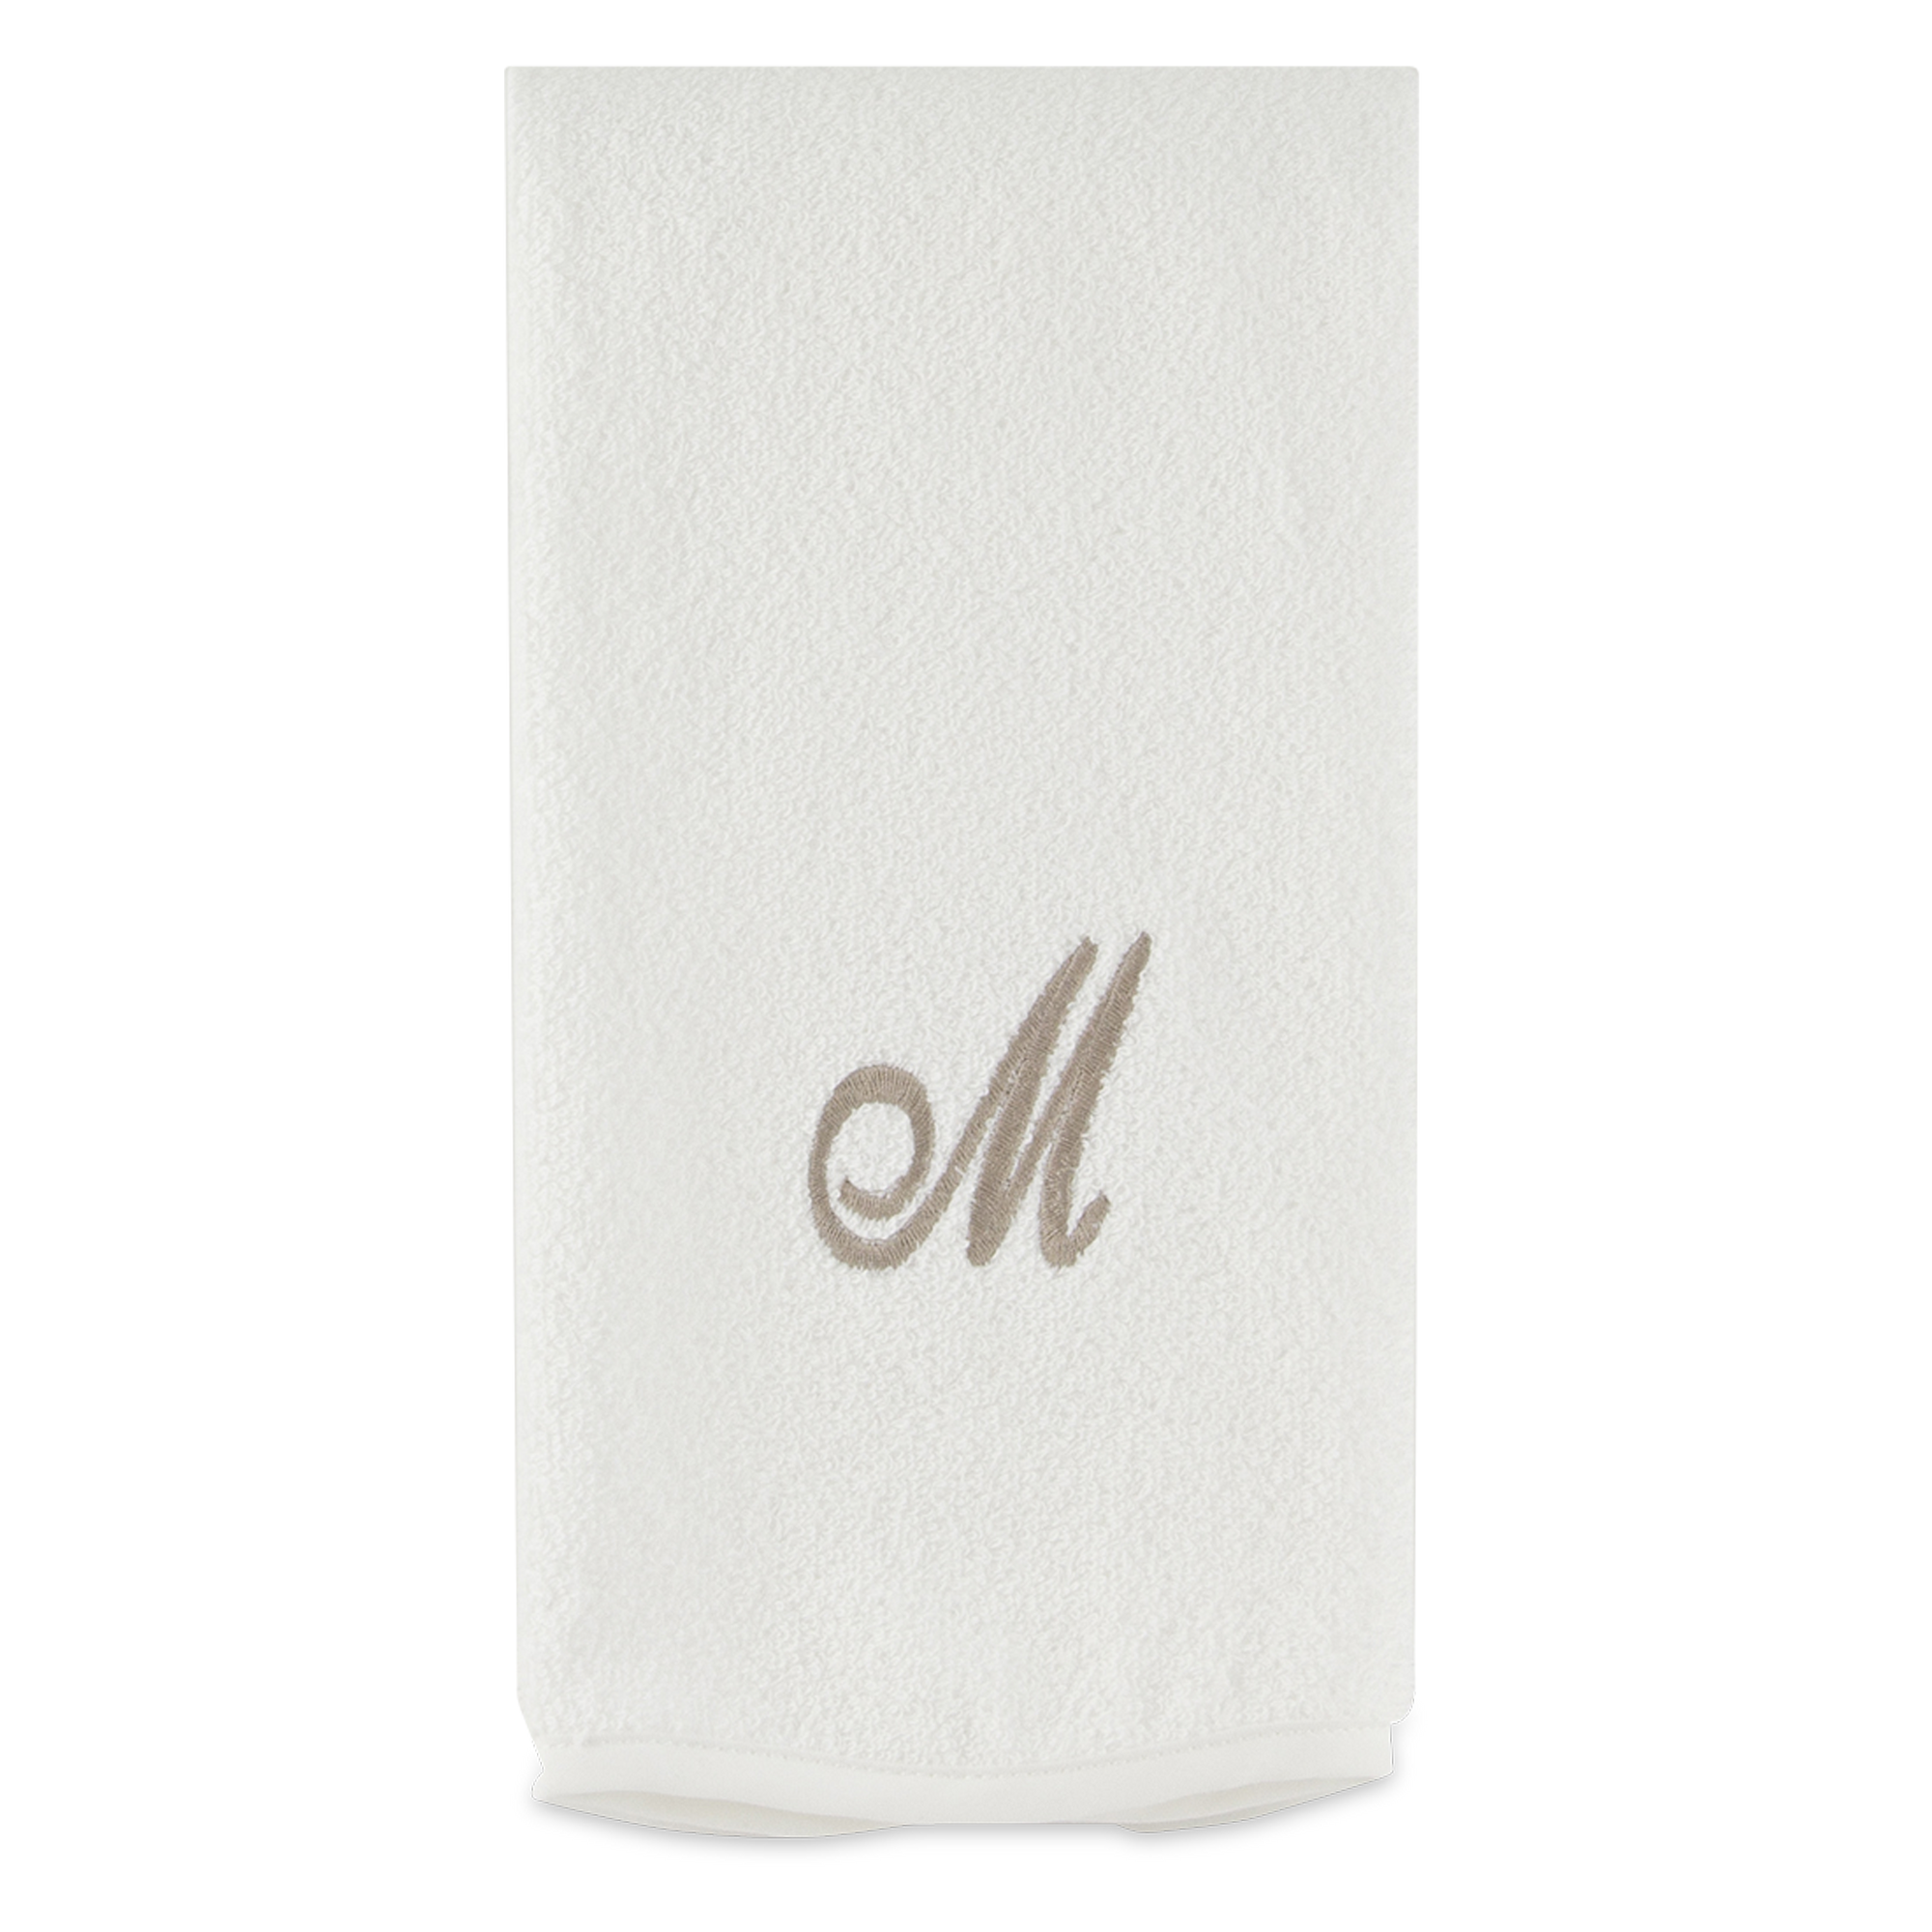 Monogrammed guest towel made of 100% white cotton with pewter/grey embroidered monogram.